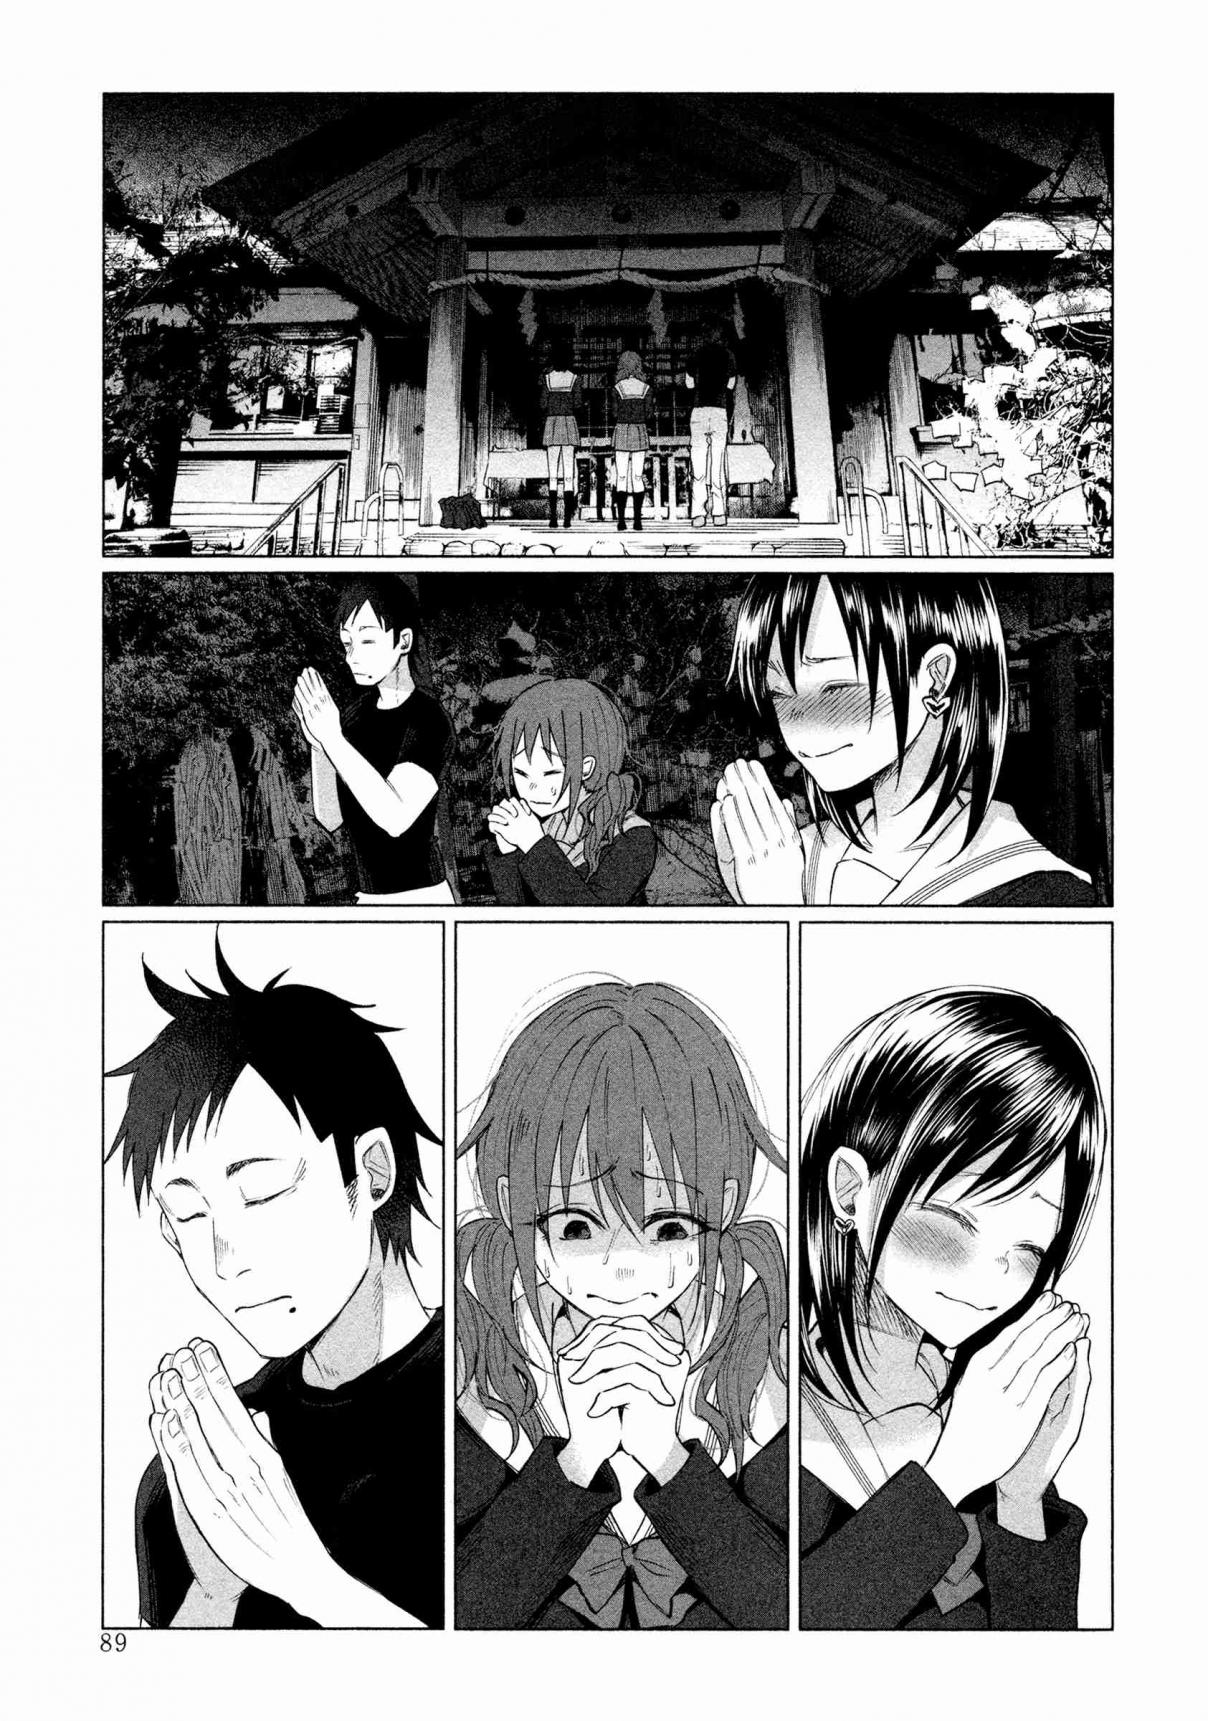 You Loved Me So Much It Hurt Vol. 1 Ch. 3 Wish